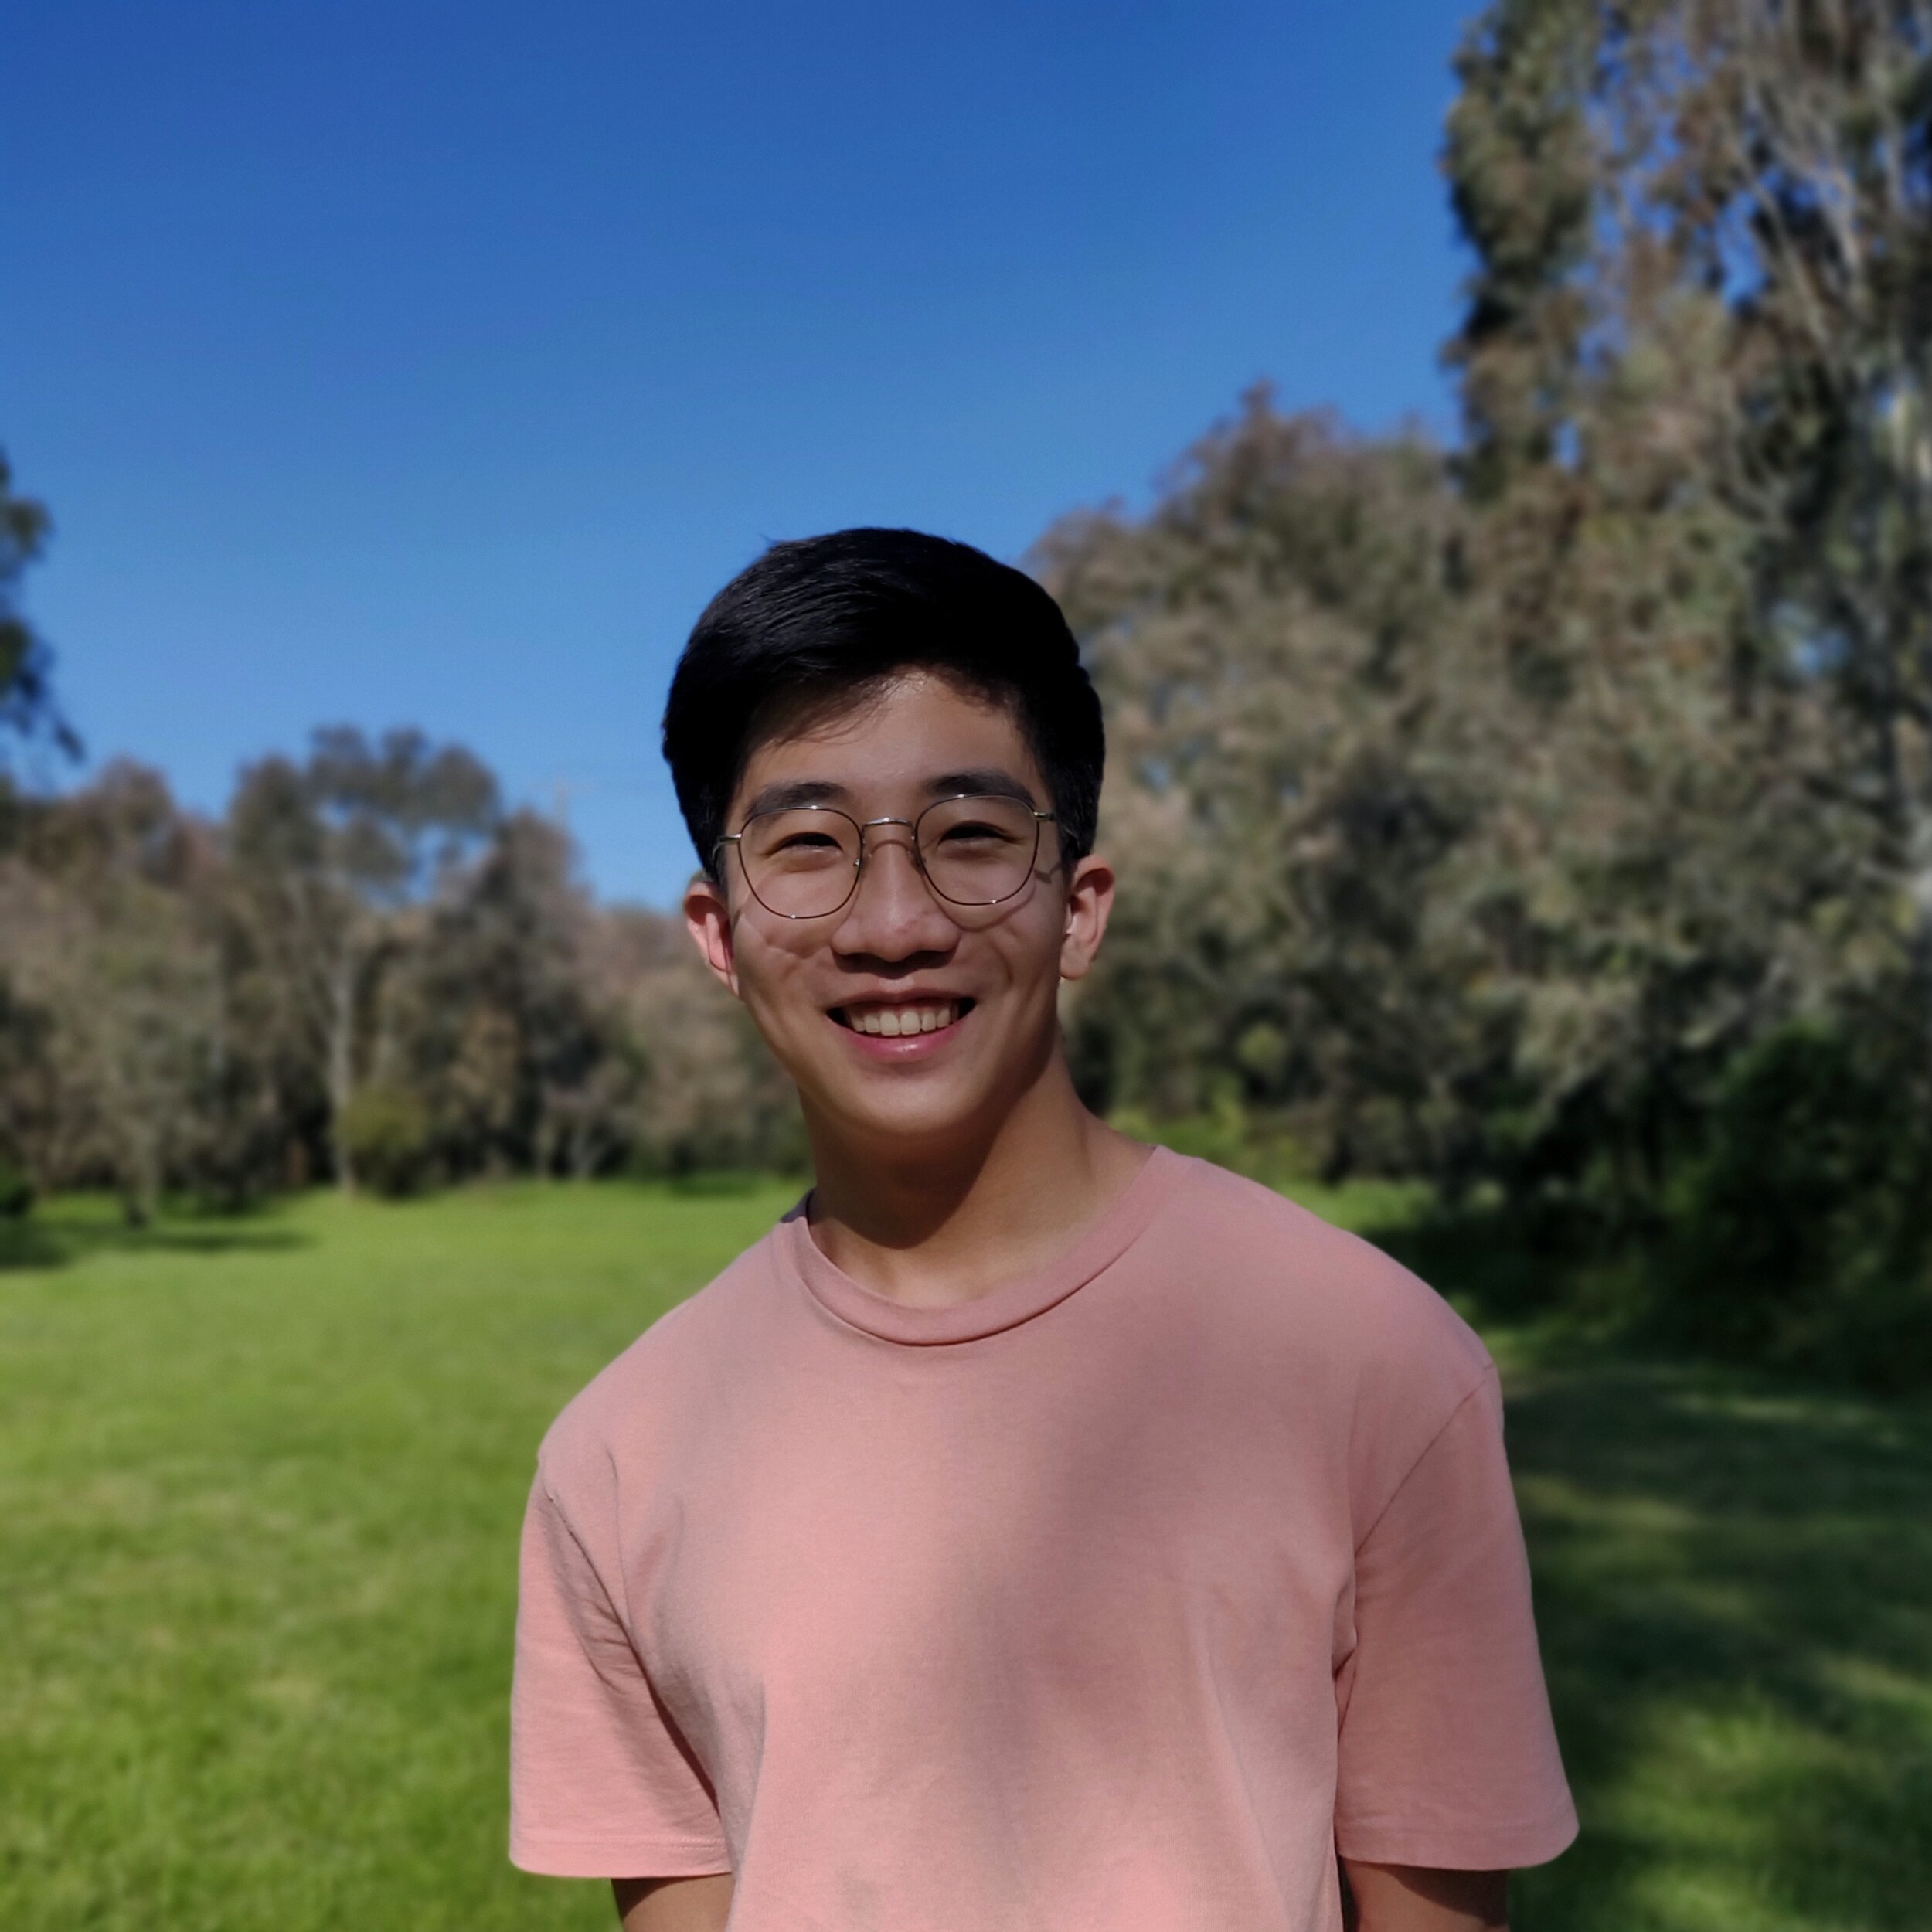 Peter Goh - Peter is the Vice-chair Internal for MUSIG in 2021. He is currently in his third year and is placed at Eastern Health. In the past two years, Peter has been working with MUSIG as the preclinical representative and looks forward to continuing to run events and workshops for the Monash student community. Peter currently has a particular interest in otolaryngology head and neck surgery and ophthalmic surgery, but he is always looking to see what is new and interesting in the rapidly developing world of surgery and its exciting new technologies. Outside of MUSIG and medicine, Peter spends his time eating and exploring his way through Melbourne and being involved with his church and the Monash Christian medical student group